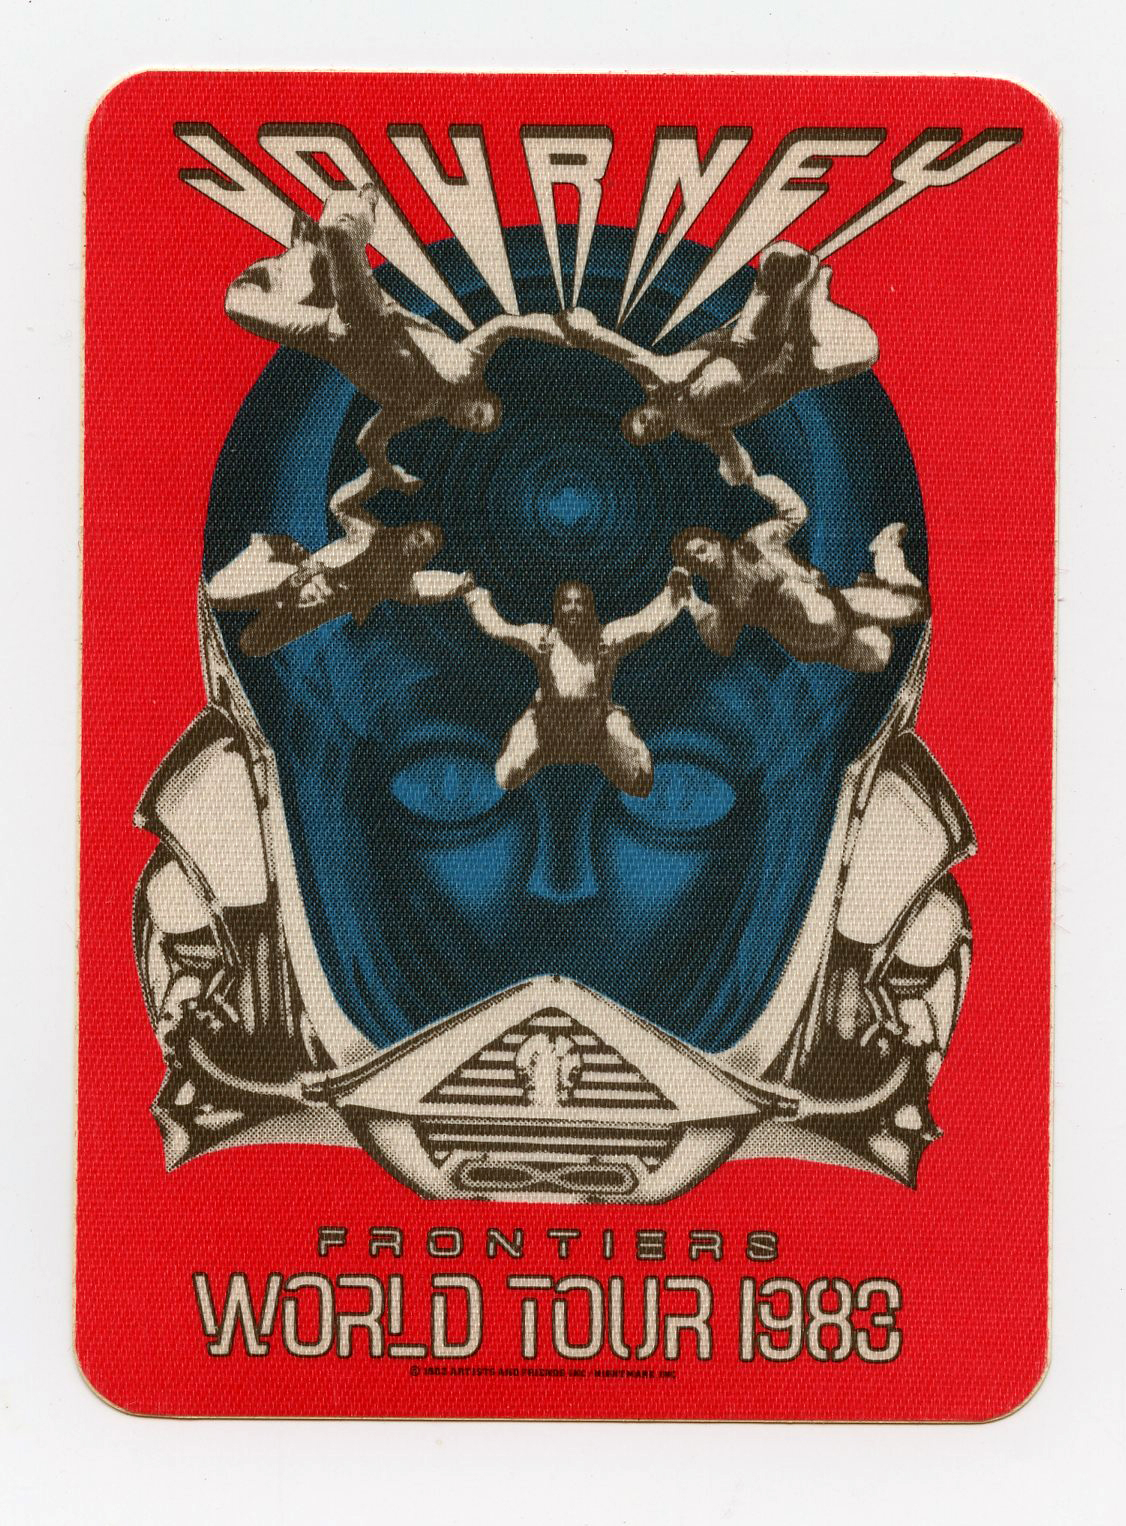 Journey Backstage Pass 1983 Frontiers World Tour